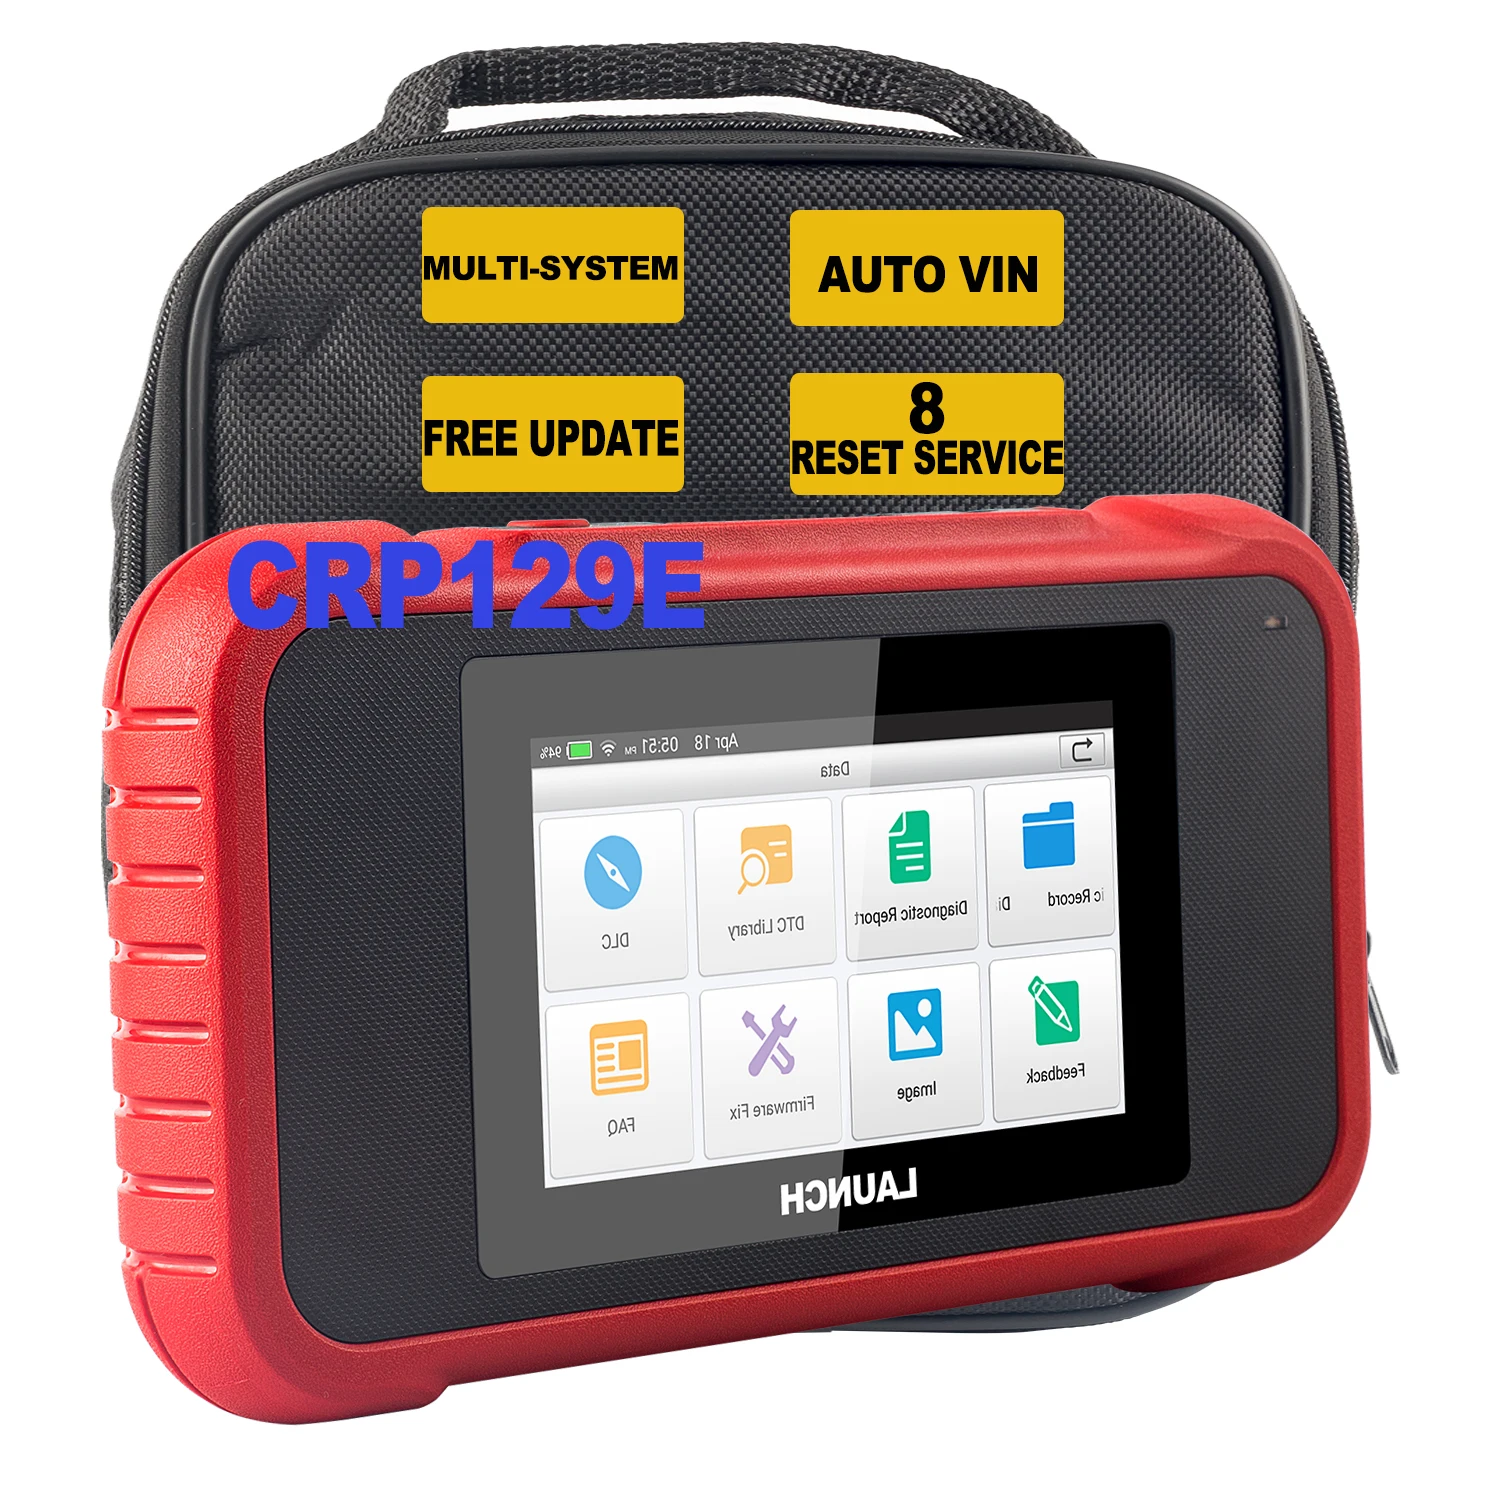 

Launch Crp129E Professional Scanner Obd2 Car Diagnostic Auto Scanner Four System Universal Motorcycle Lifetime Free Upgrade